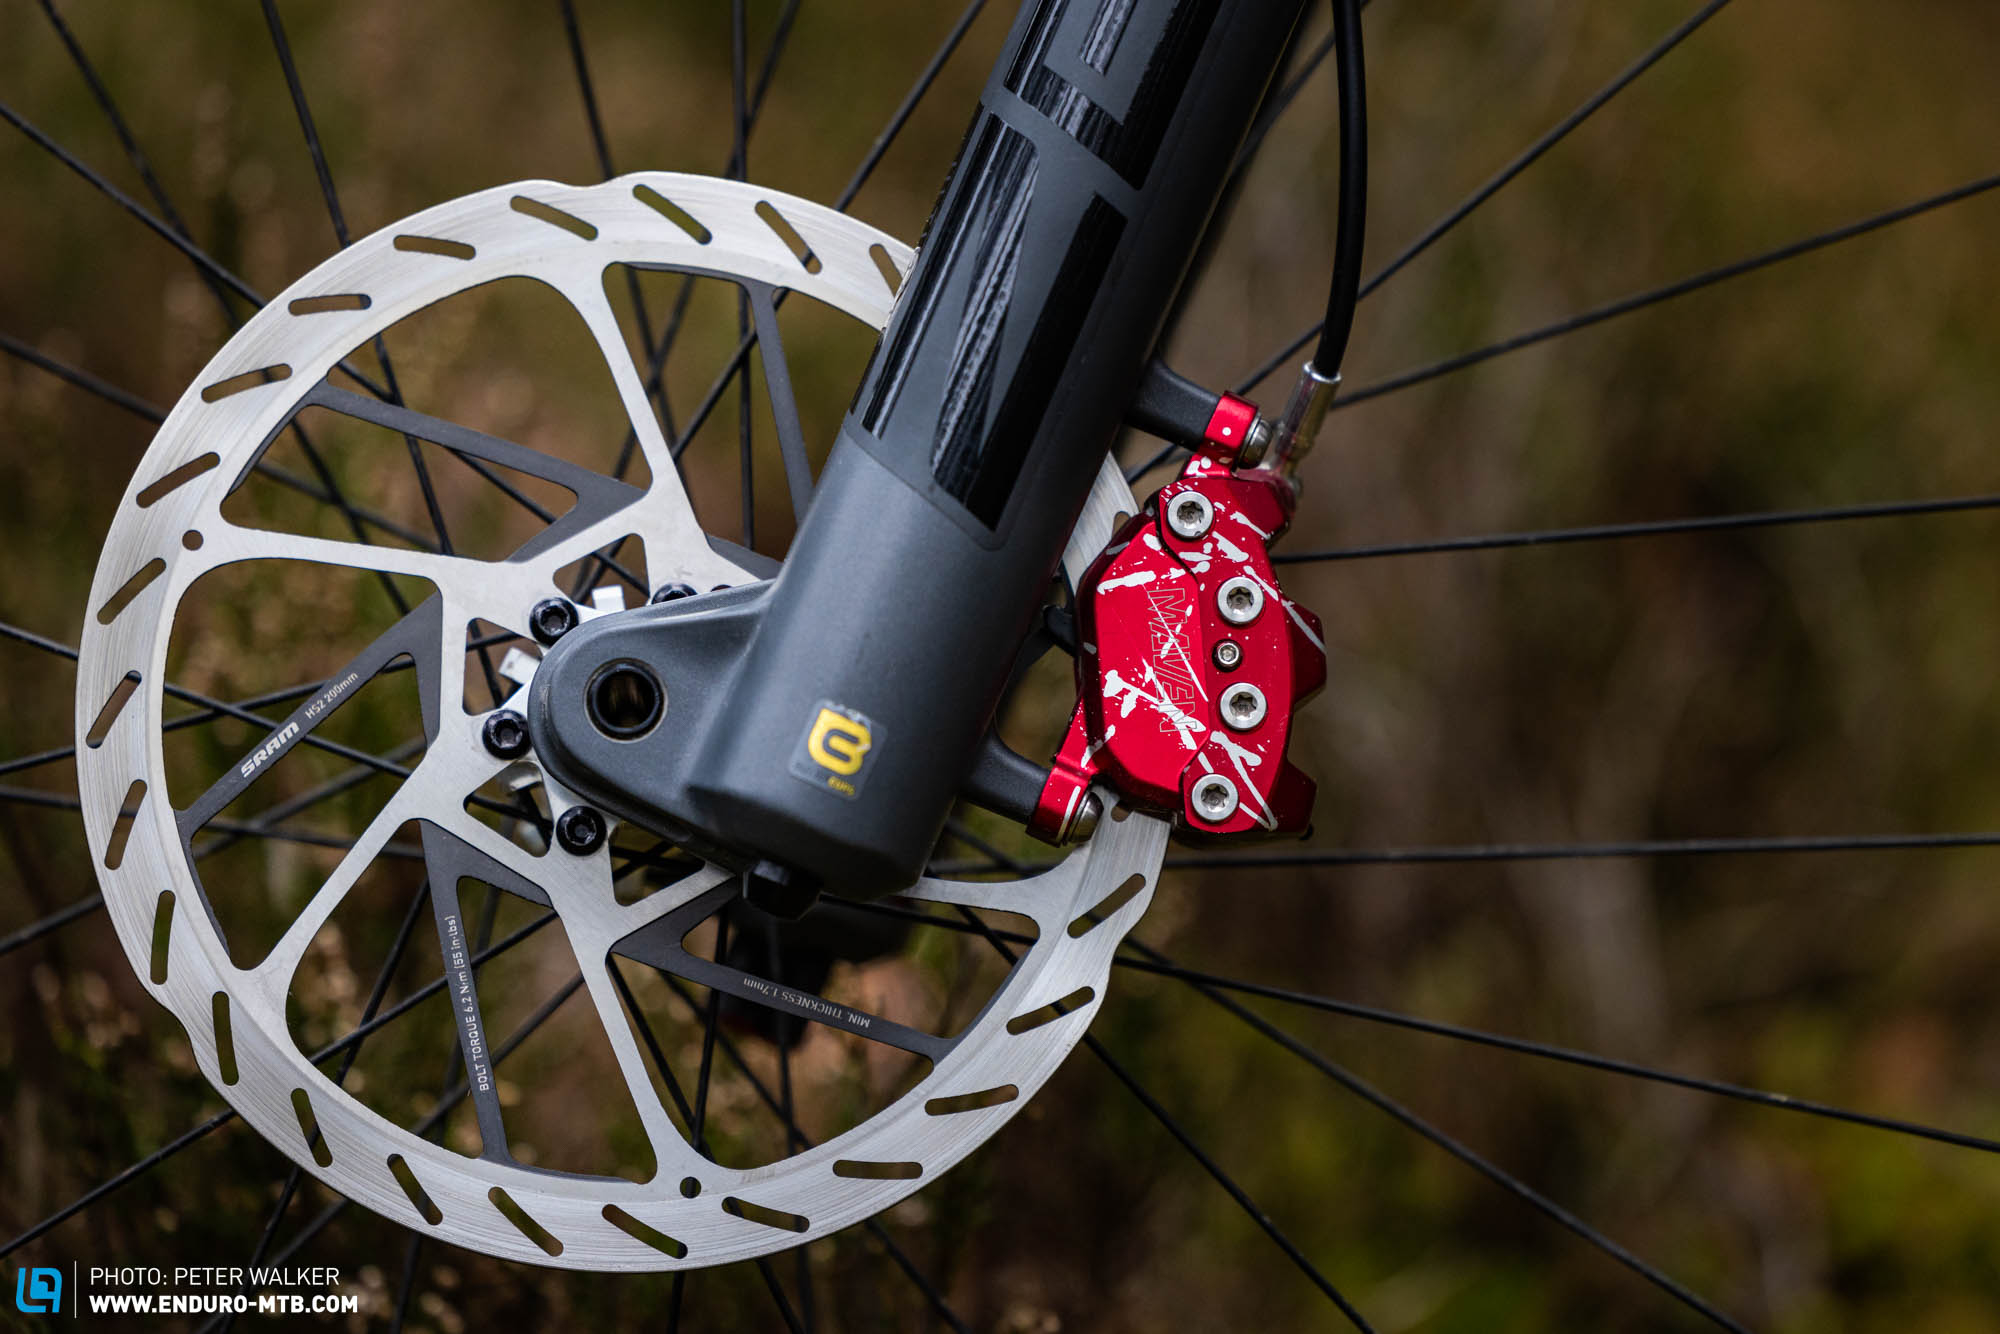 The new SRAM Maven brakes on test – Sheer power with fine modulation?